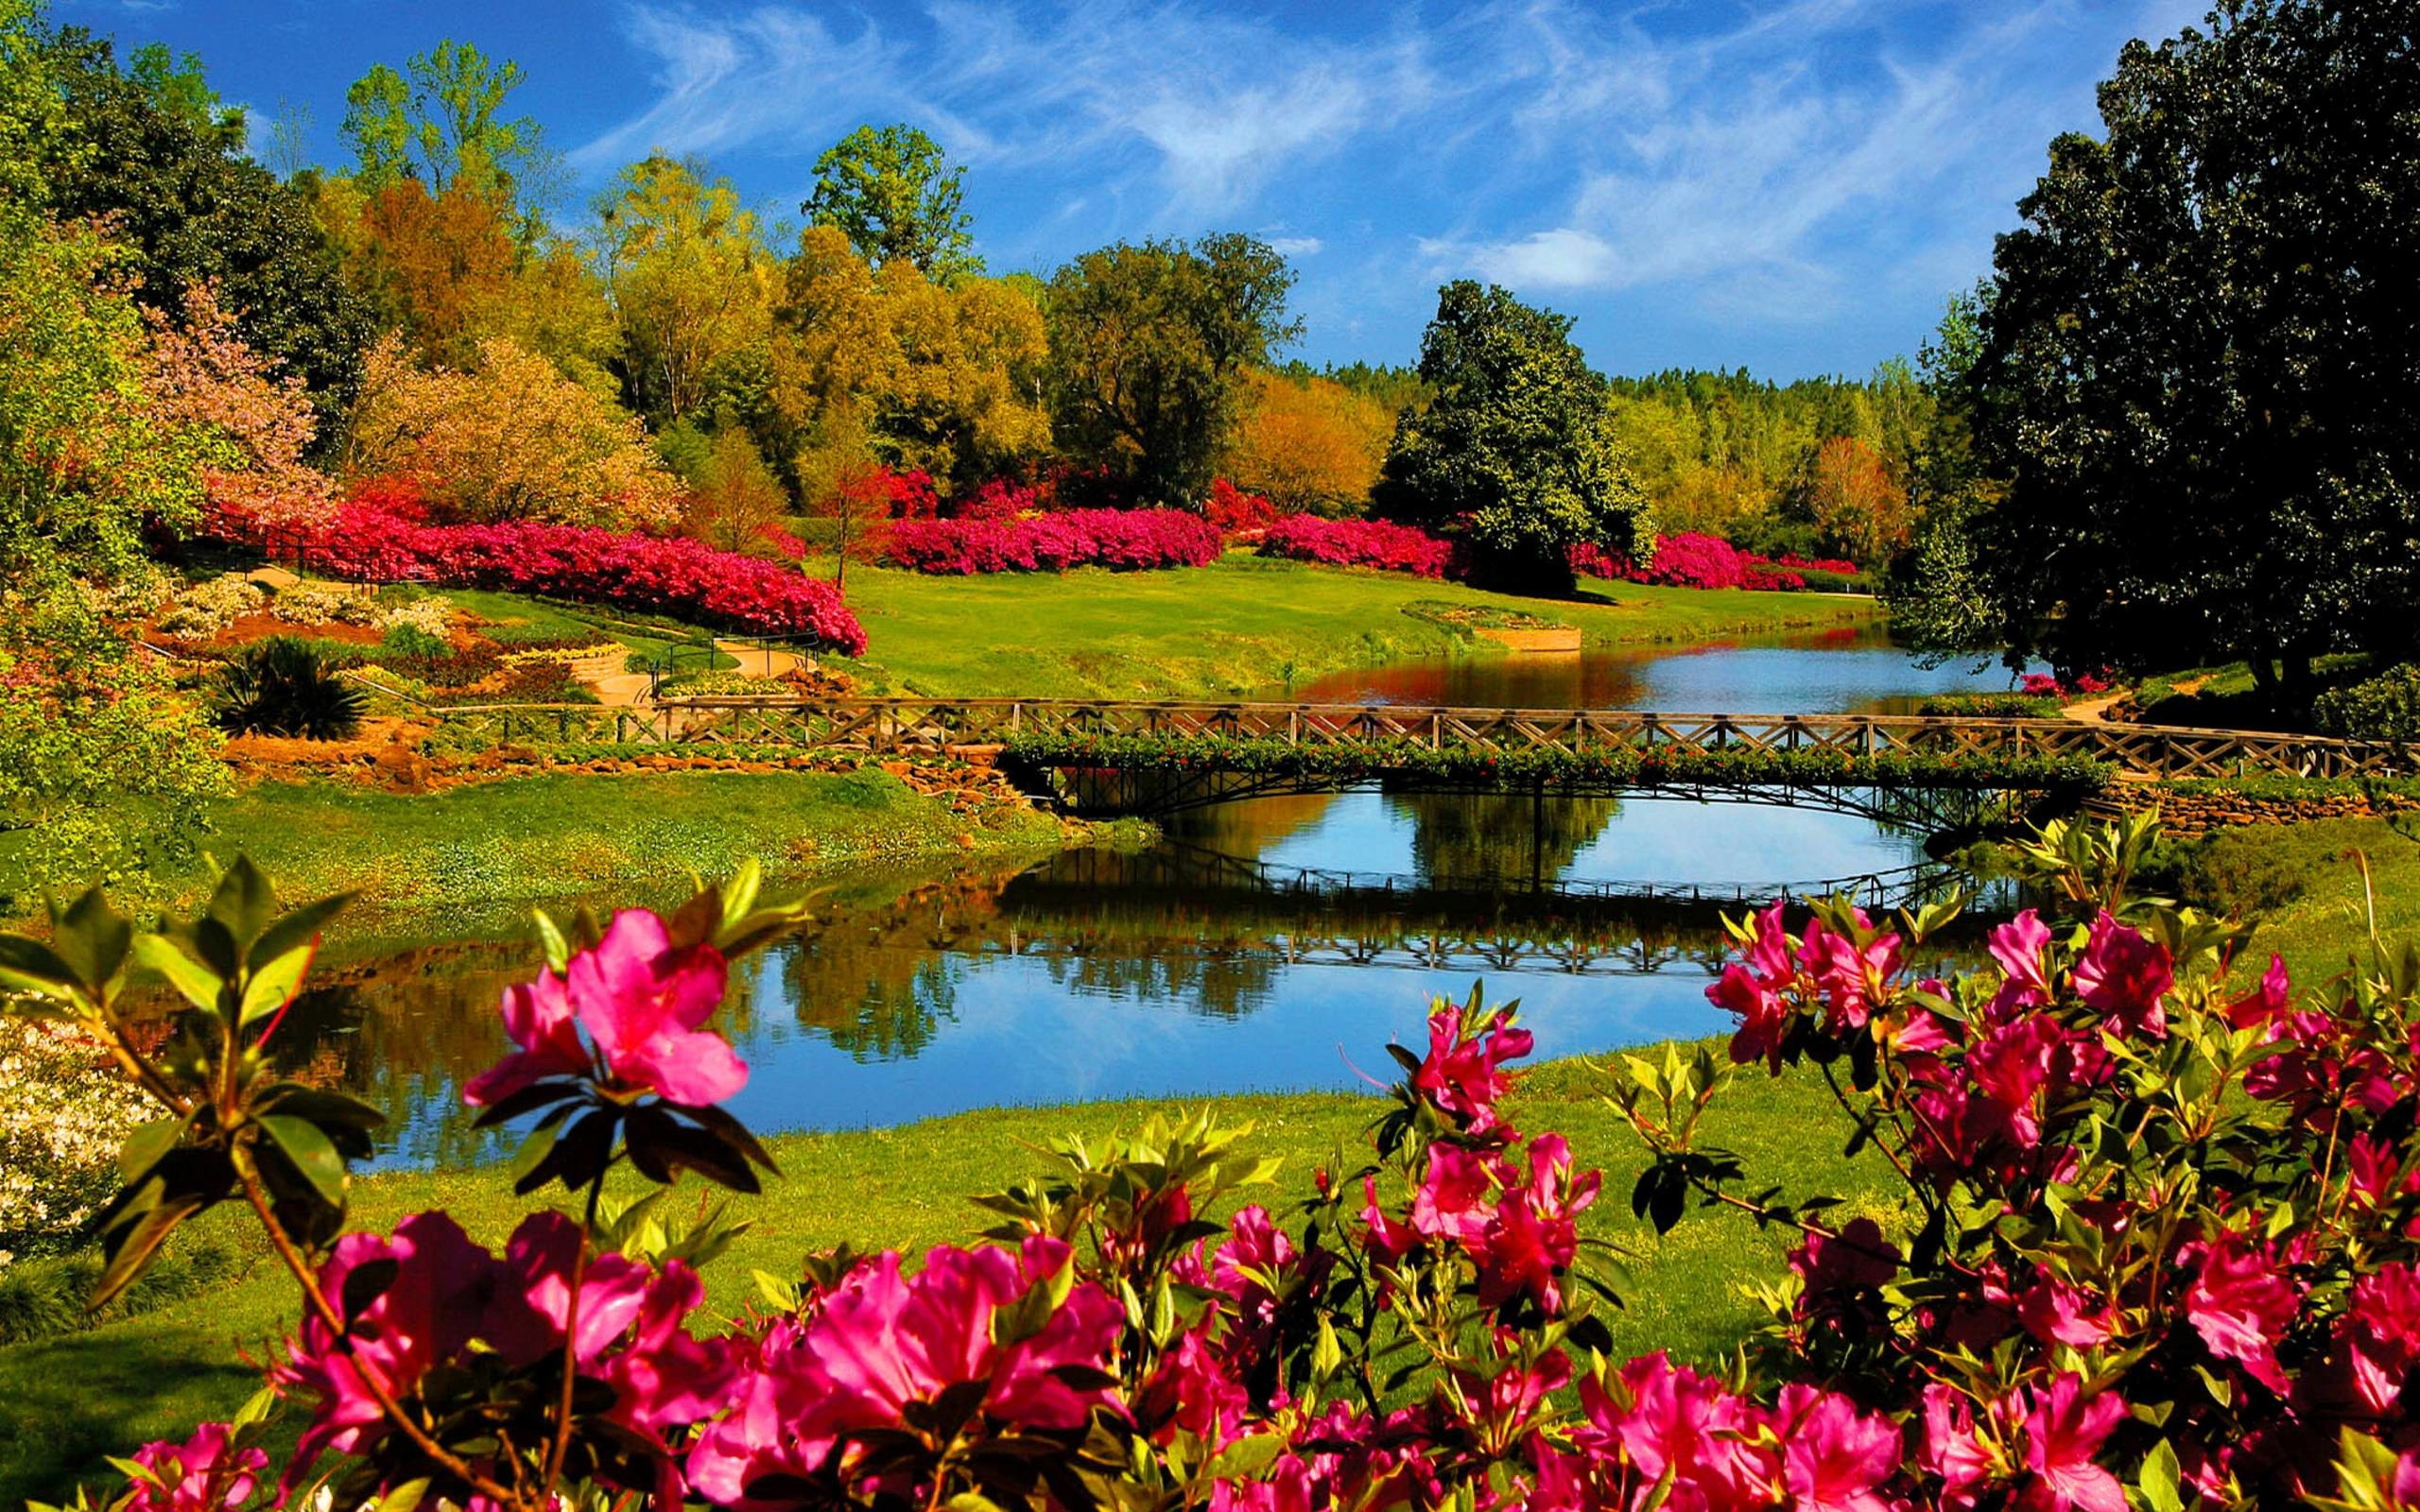 2560x1600 http://www.wallpaperpin.com/webdisk/beautiful-spring-landscape-wallpapers.jpg  | PC WALLPAPERS THAT ARE BEAUTIFUL & AWESOME | Pinterest | Landscape  wallpaper ...